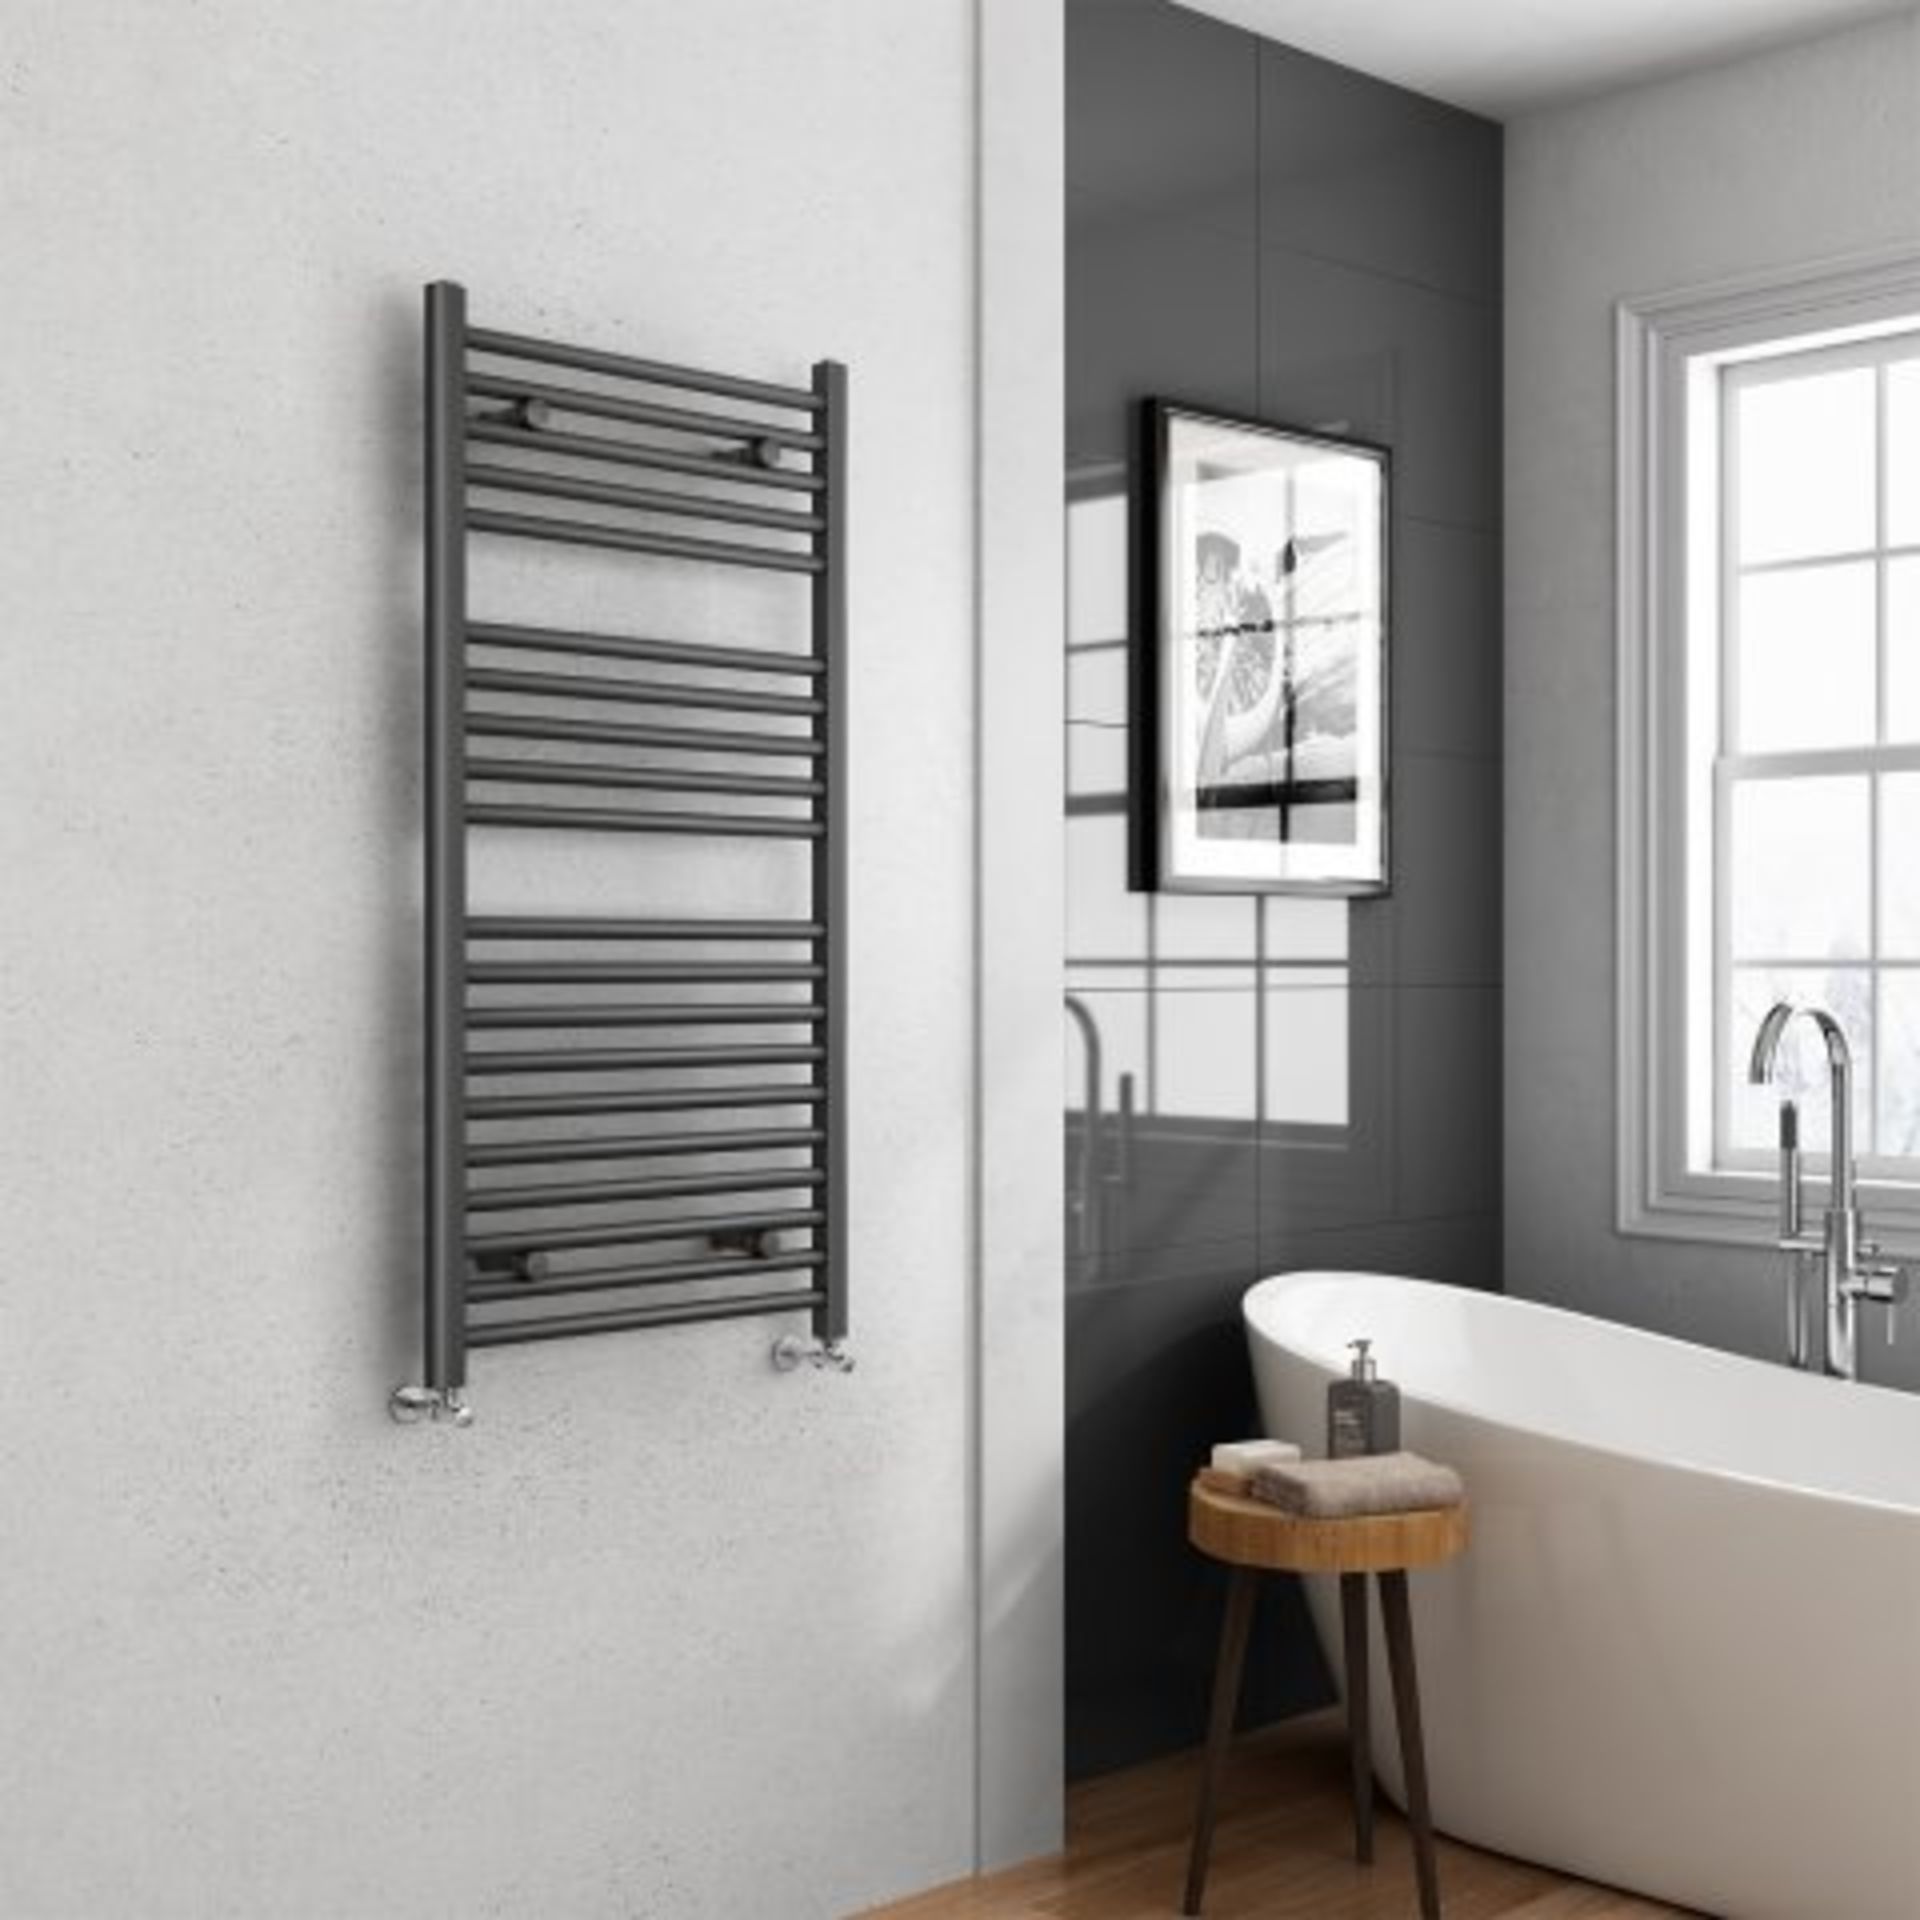 (H184) 1200x600mm - 25mm Tubes - Anthracite Heated Straight Rail Ladder Towel Radiator. RRP £249.98. - Image 2 of 3